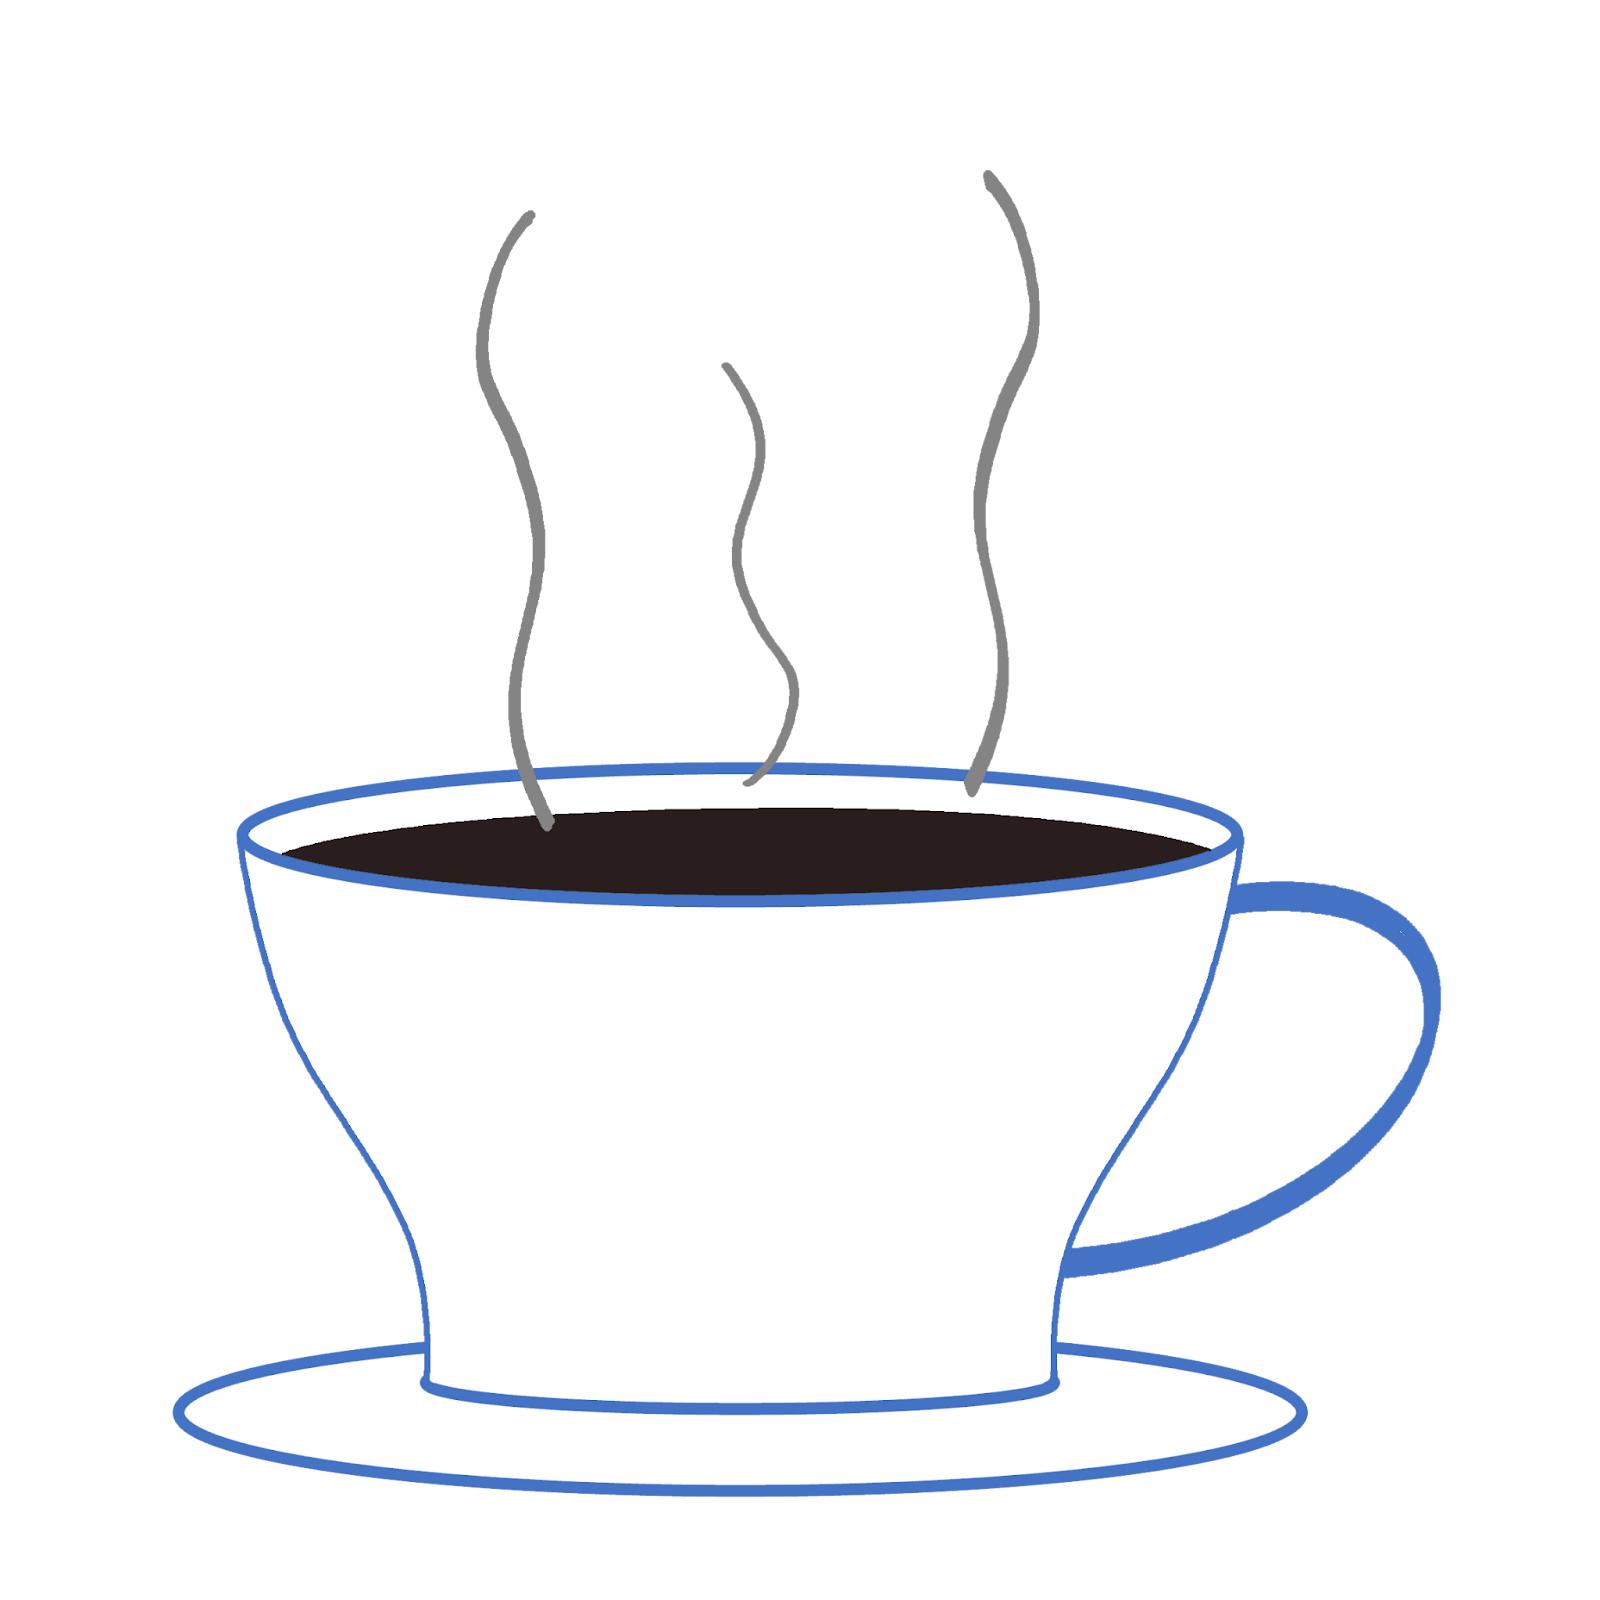 A clipart drawing of a cup of coffee with steam coming from the coffee.